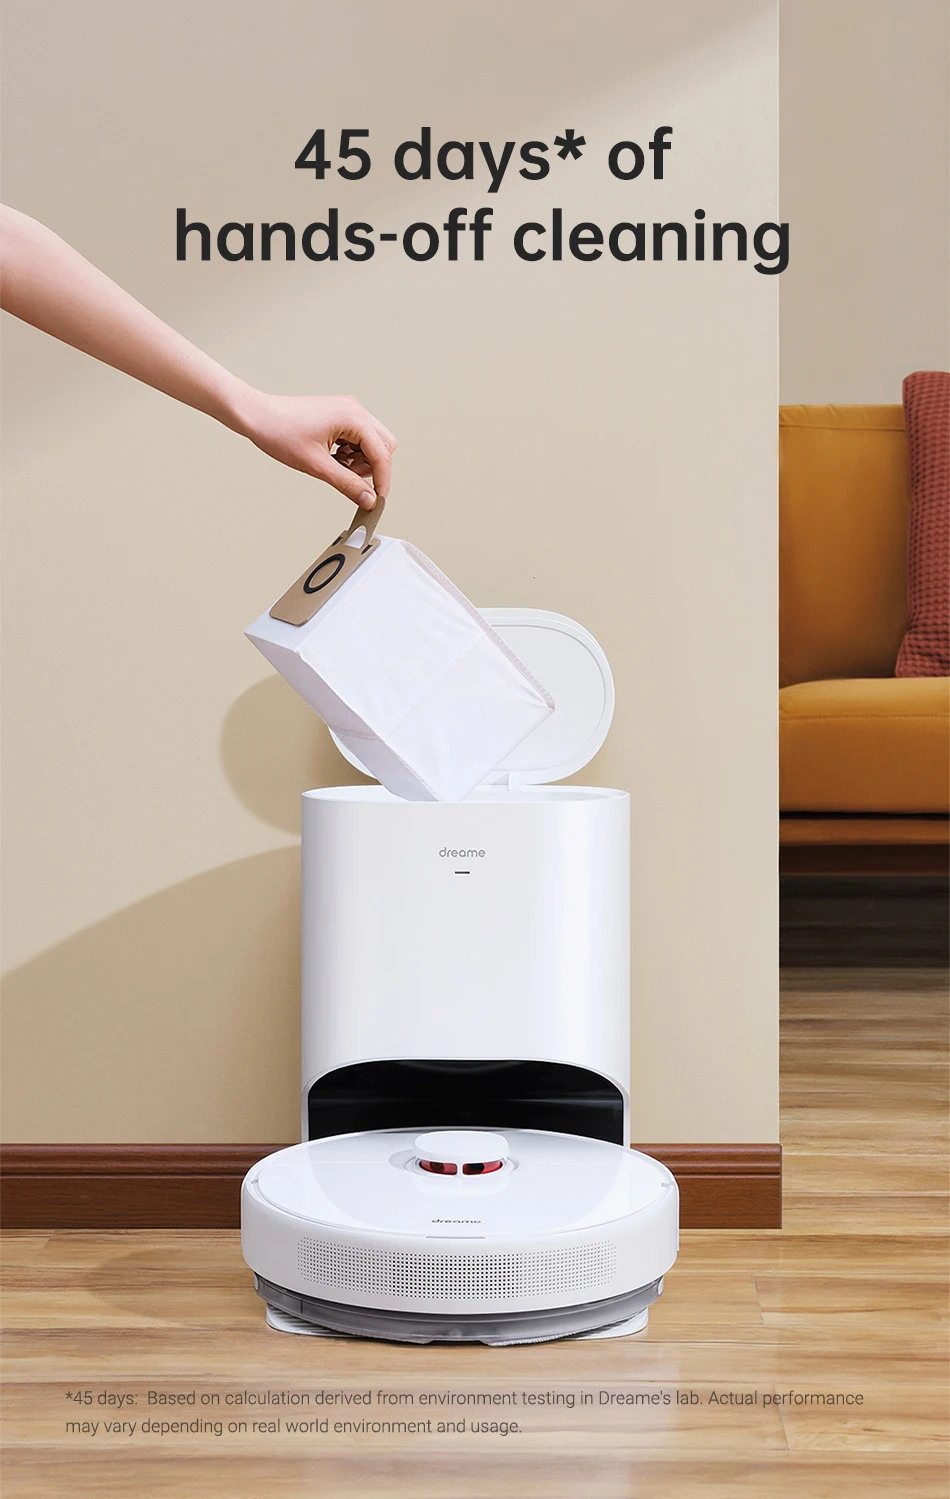 Rent Dreame D10 plus Vacuum & Mop Robot Cleaner with Automatic Dirt  Disposal from €22.90 per month